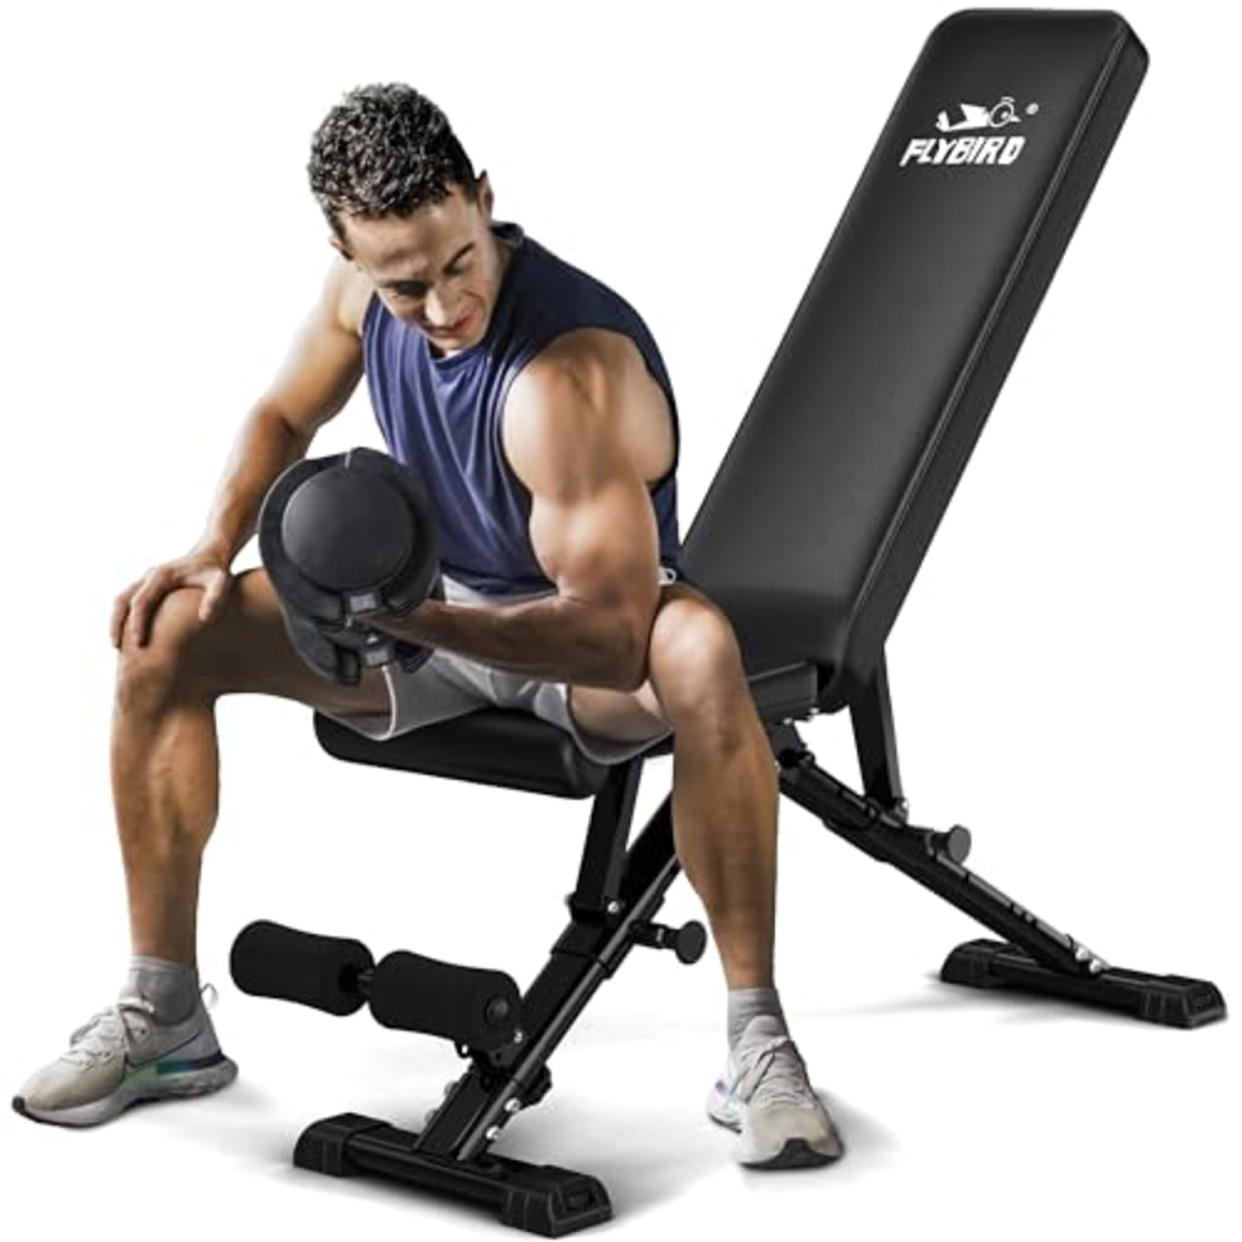 FLYBIRD Weight Bench, Adjustable Strength Training Bench for Full Body Workout with Fast Folding-New Version (AMAZON)